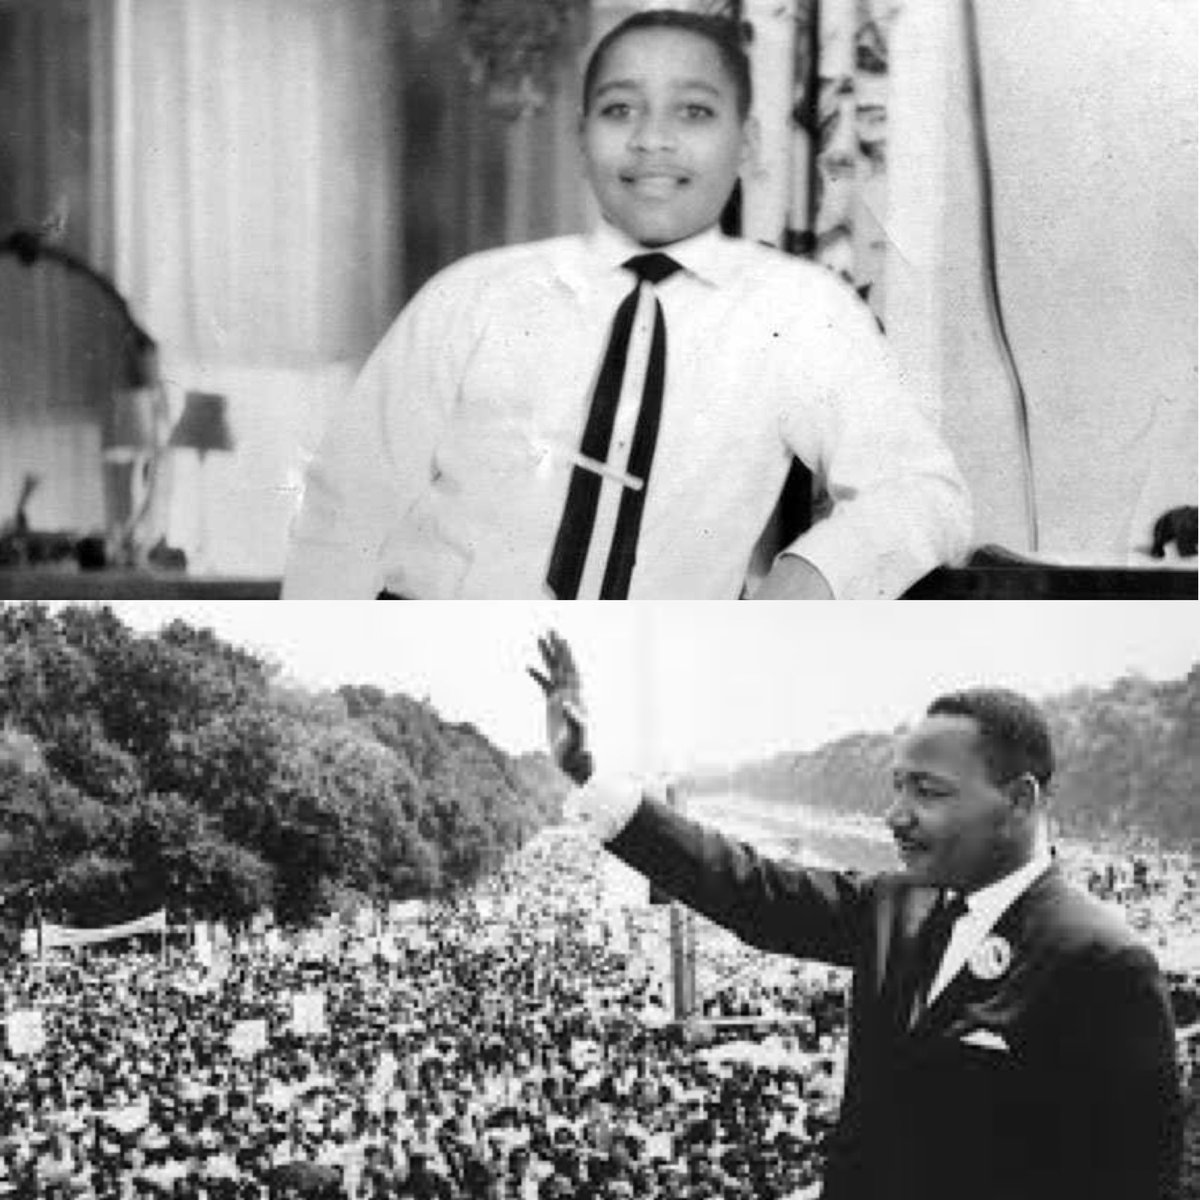 68 years ago today (8 years to the day before the #MarchOnWashington and my father’s #IHaveADream speech), #EmmettTill was tortured and murdered in a brutal act of white supremacist terrorism. The horrific murder of Emmett Till further galvanized the Civil Rights Movement. #MLK